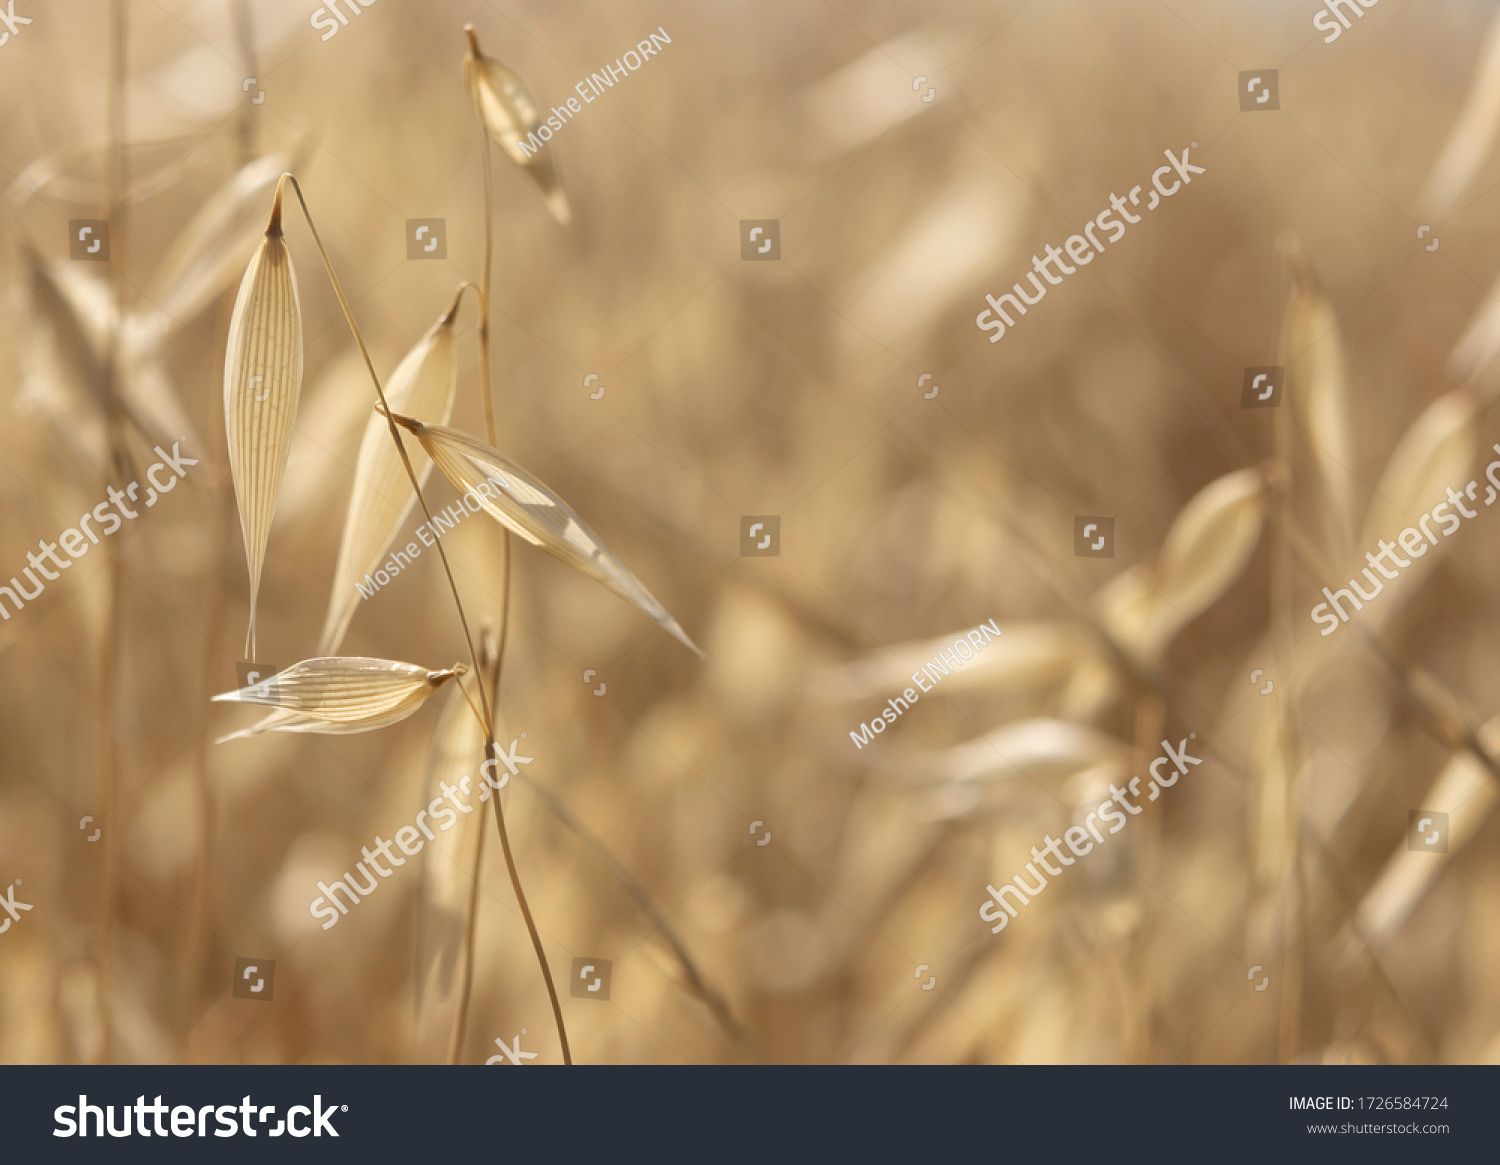 A field of dry oats on a sunny day. A close up photograph with a shallow depth of field and copy space. #1726584724